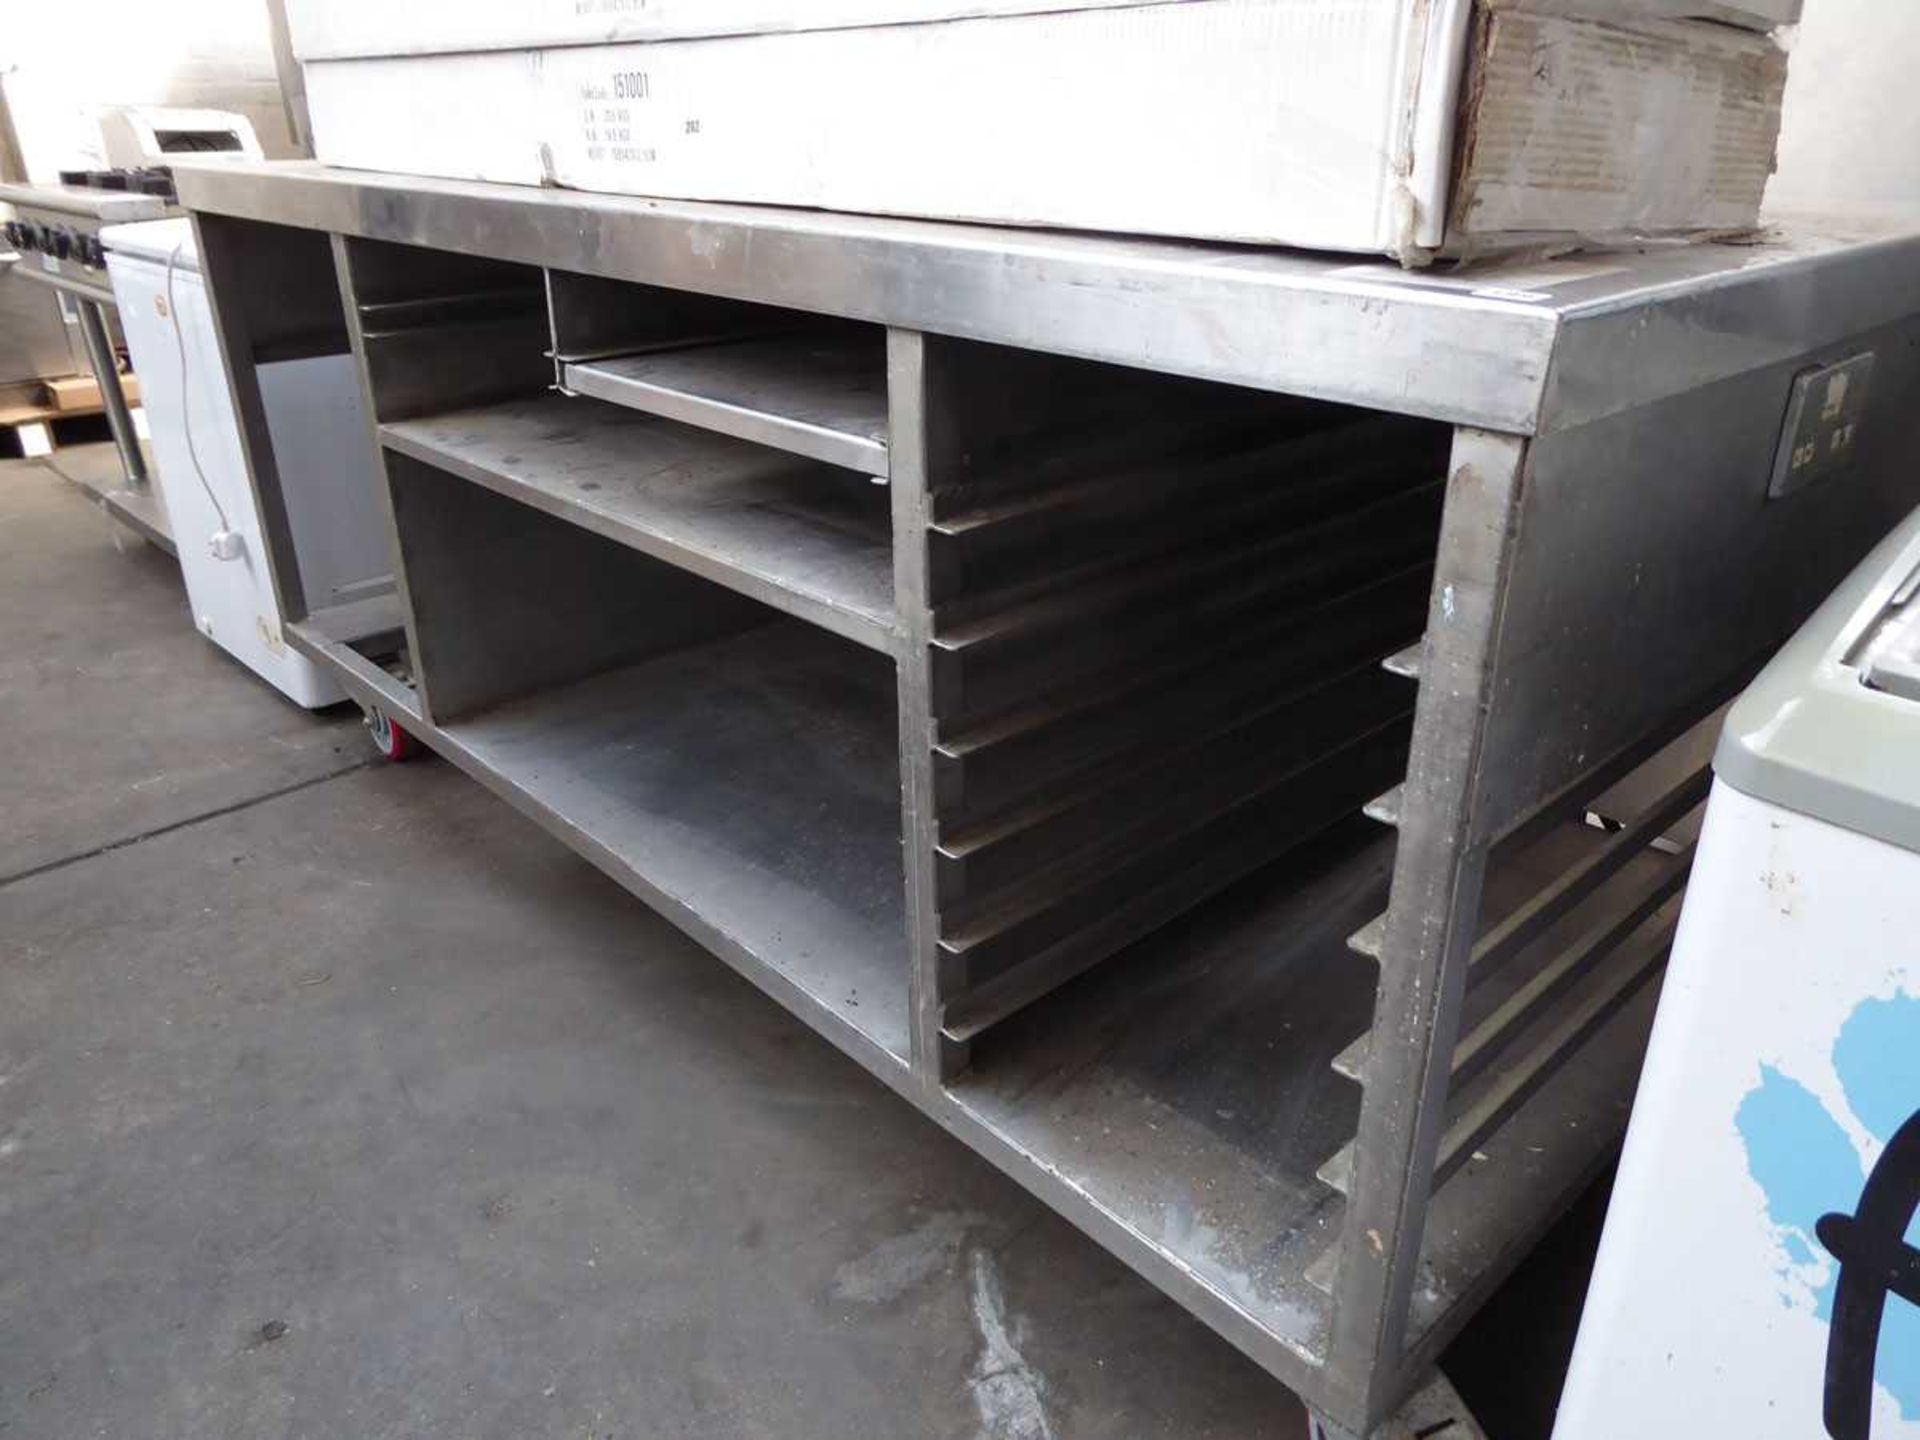 210cm mobile stainless steel preparation unit with space under for trays, shelves, etc